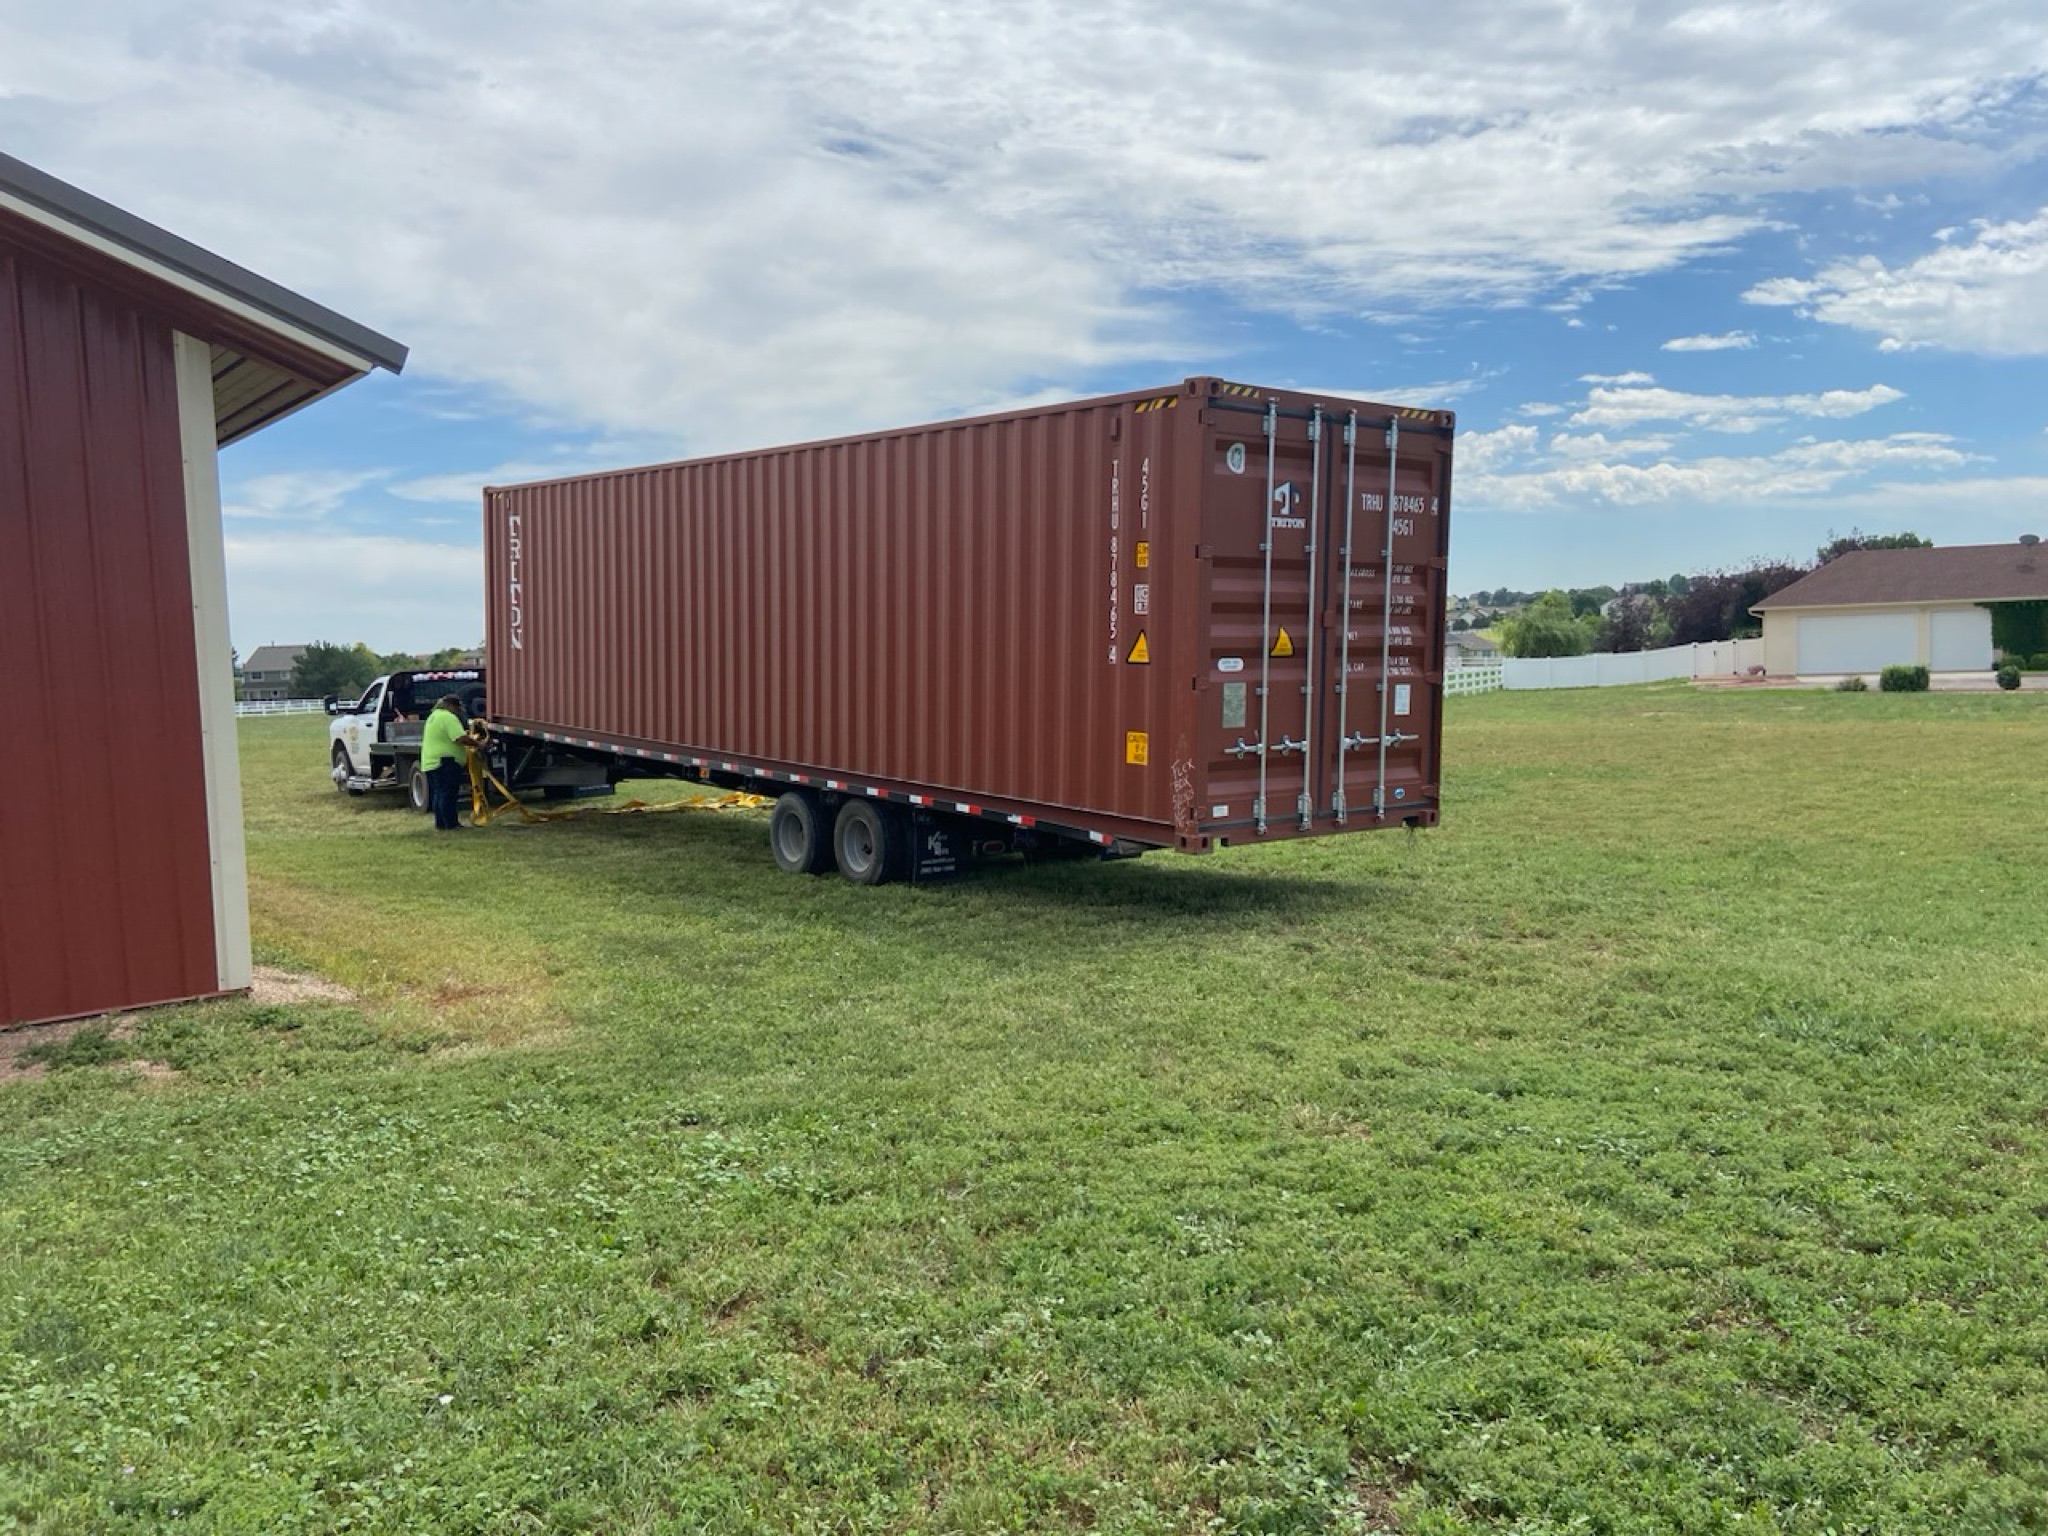 Securing an overweight container to a flatbed trailer.